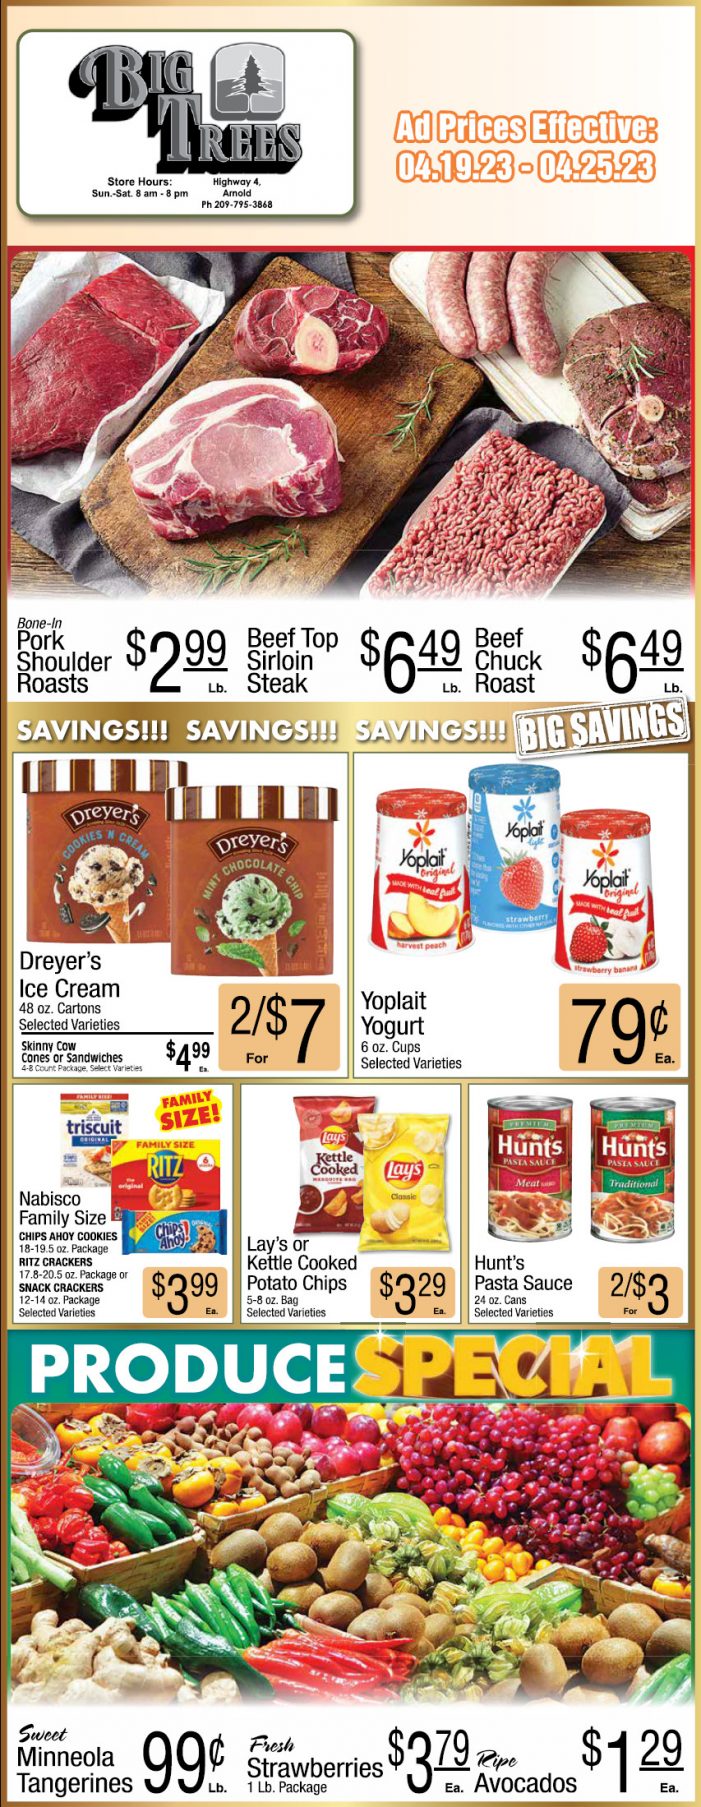 Big Trees Market Weekly Ad, Grocery, Produce, Meat & Deli Specials April 19 – 25!  Shop Local & Save!